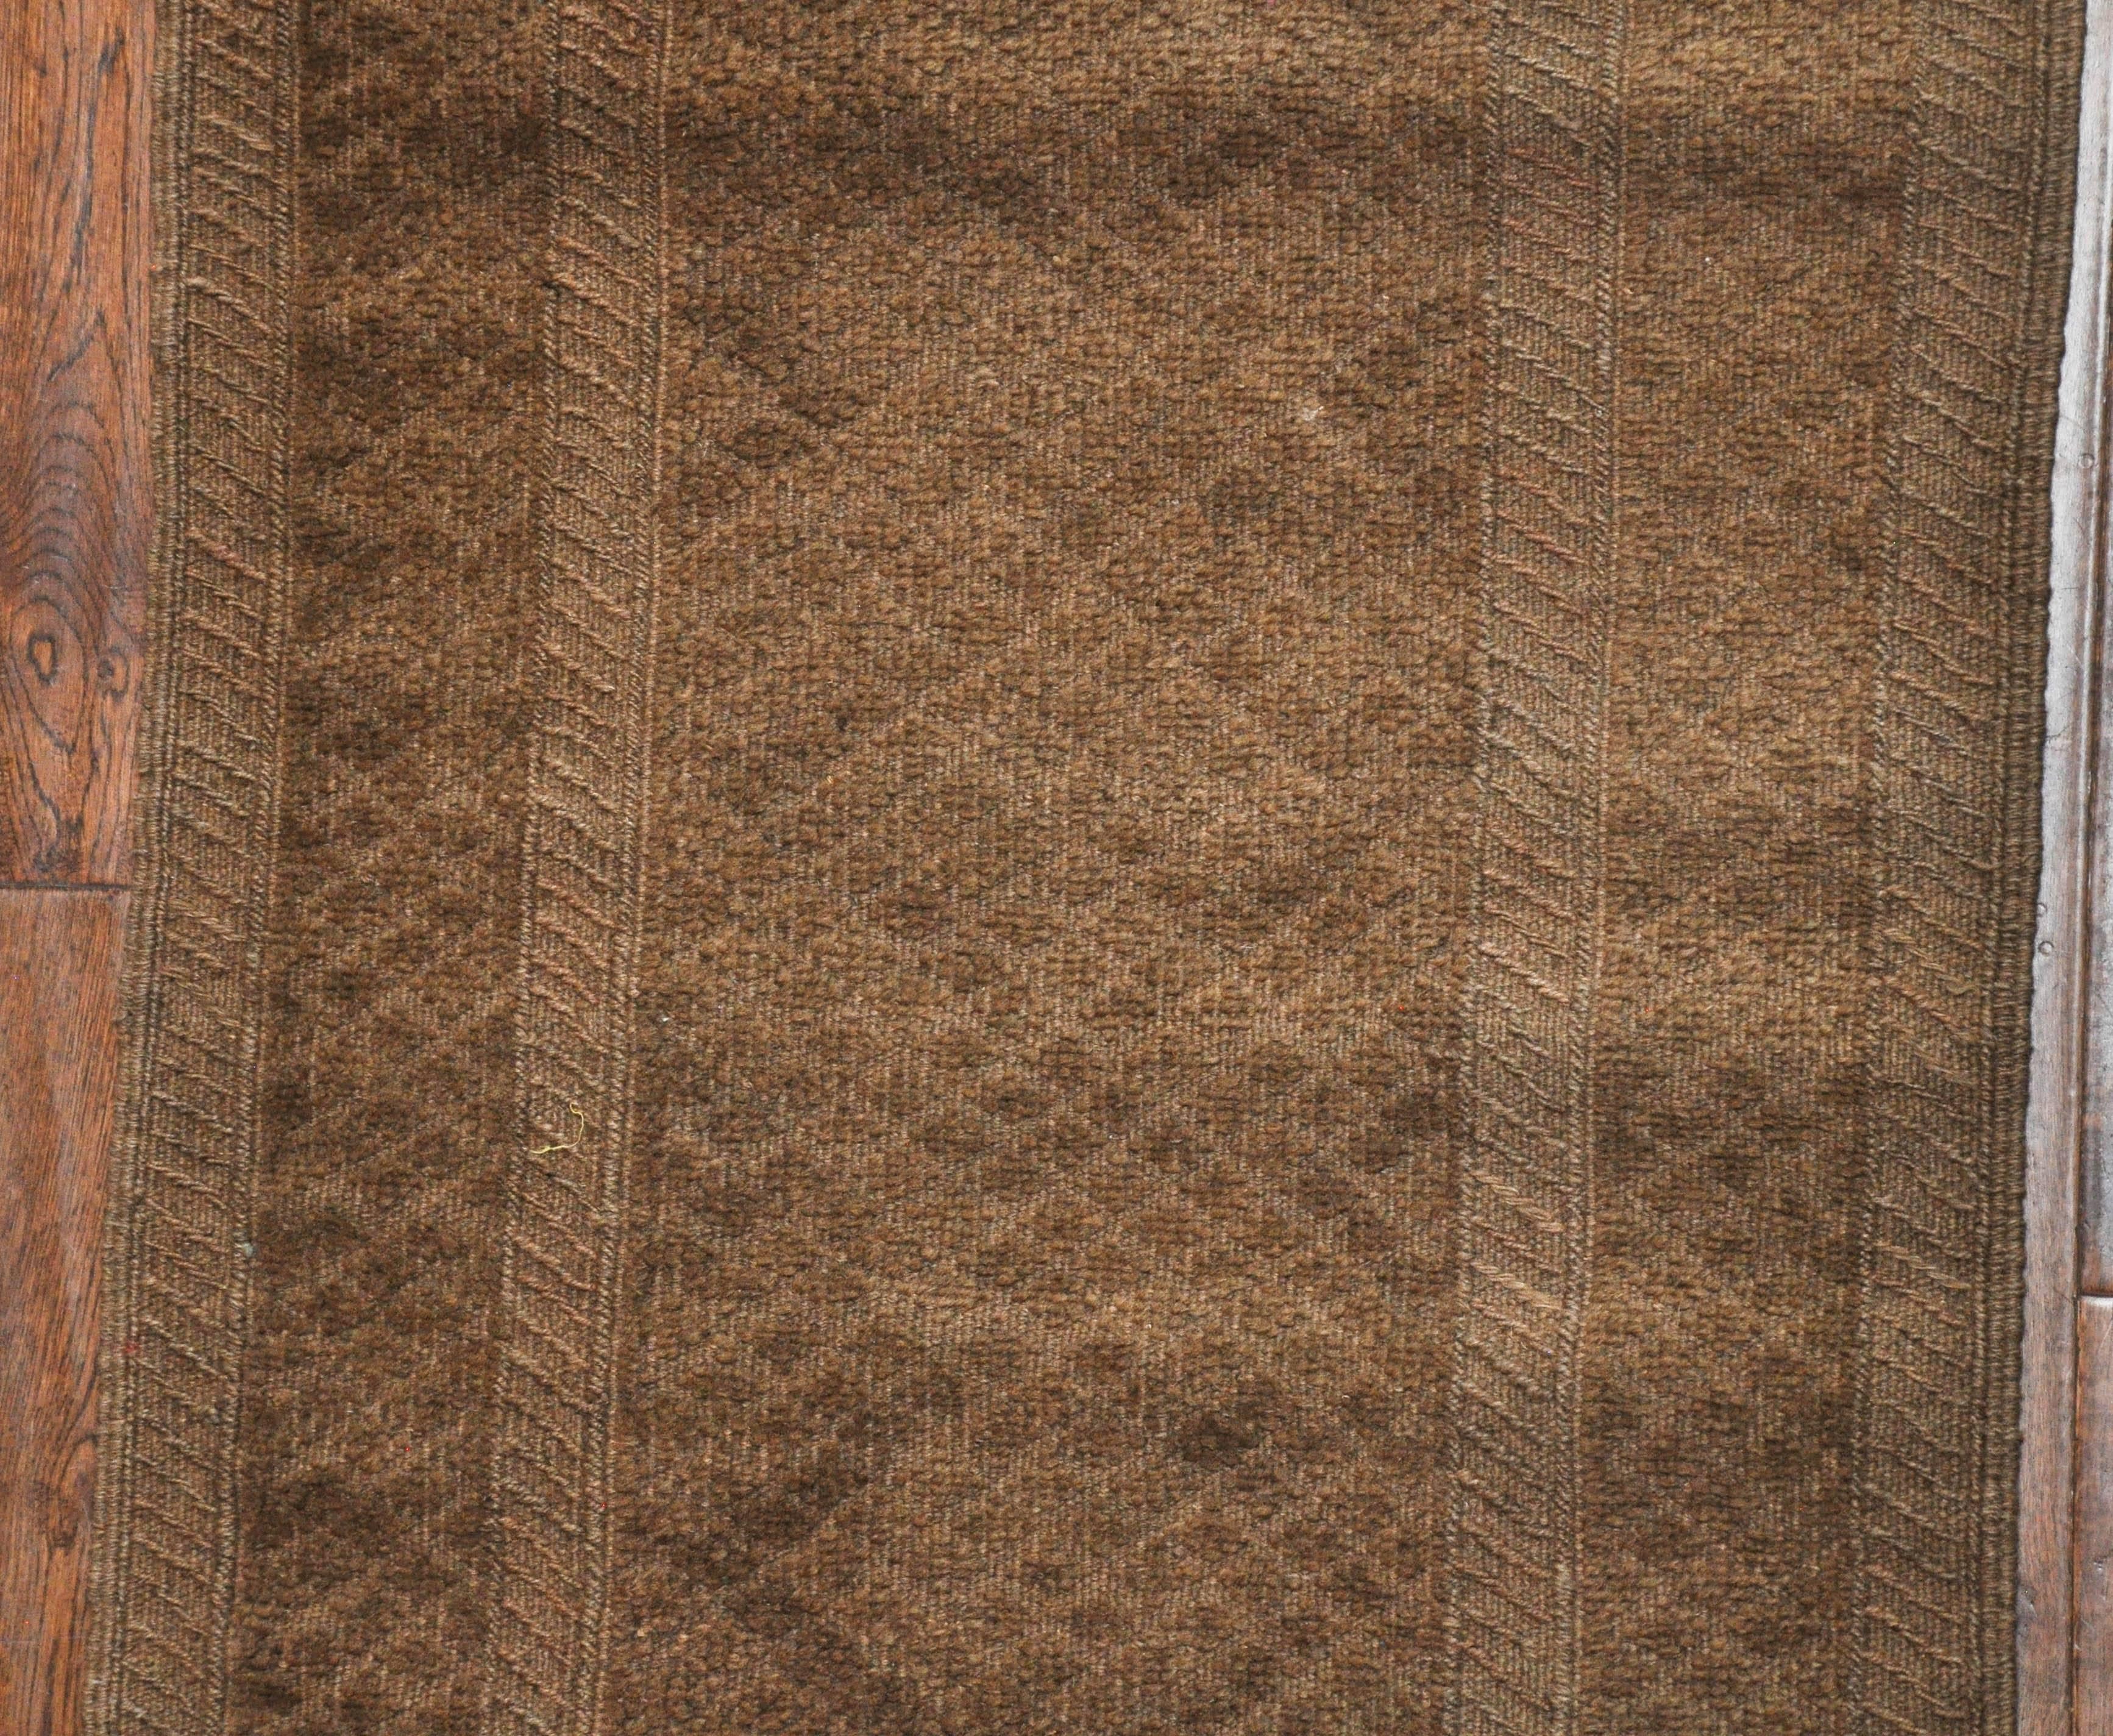 Early 20th Century Extra Long Turkish Runner 1